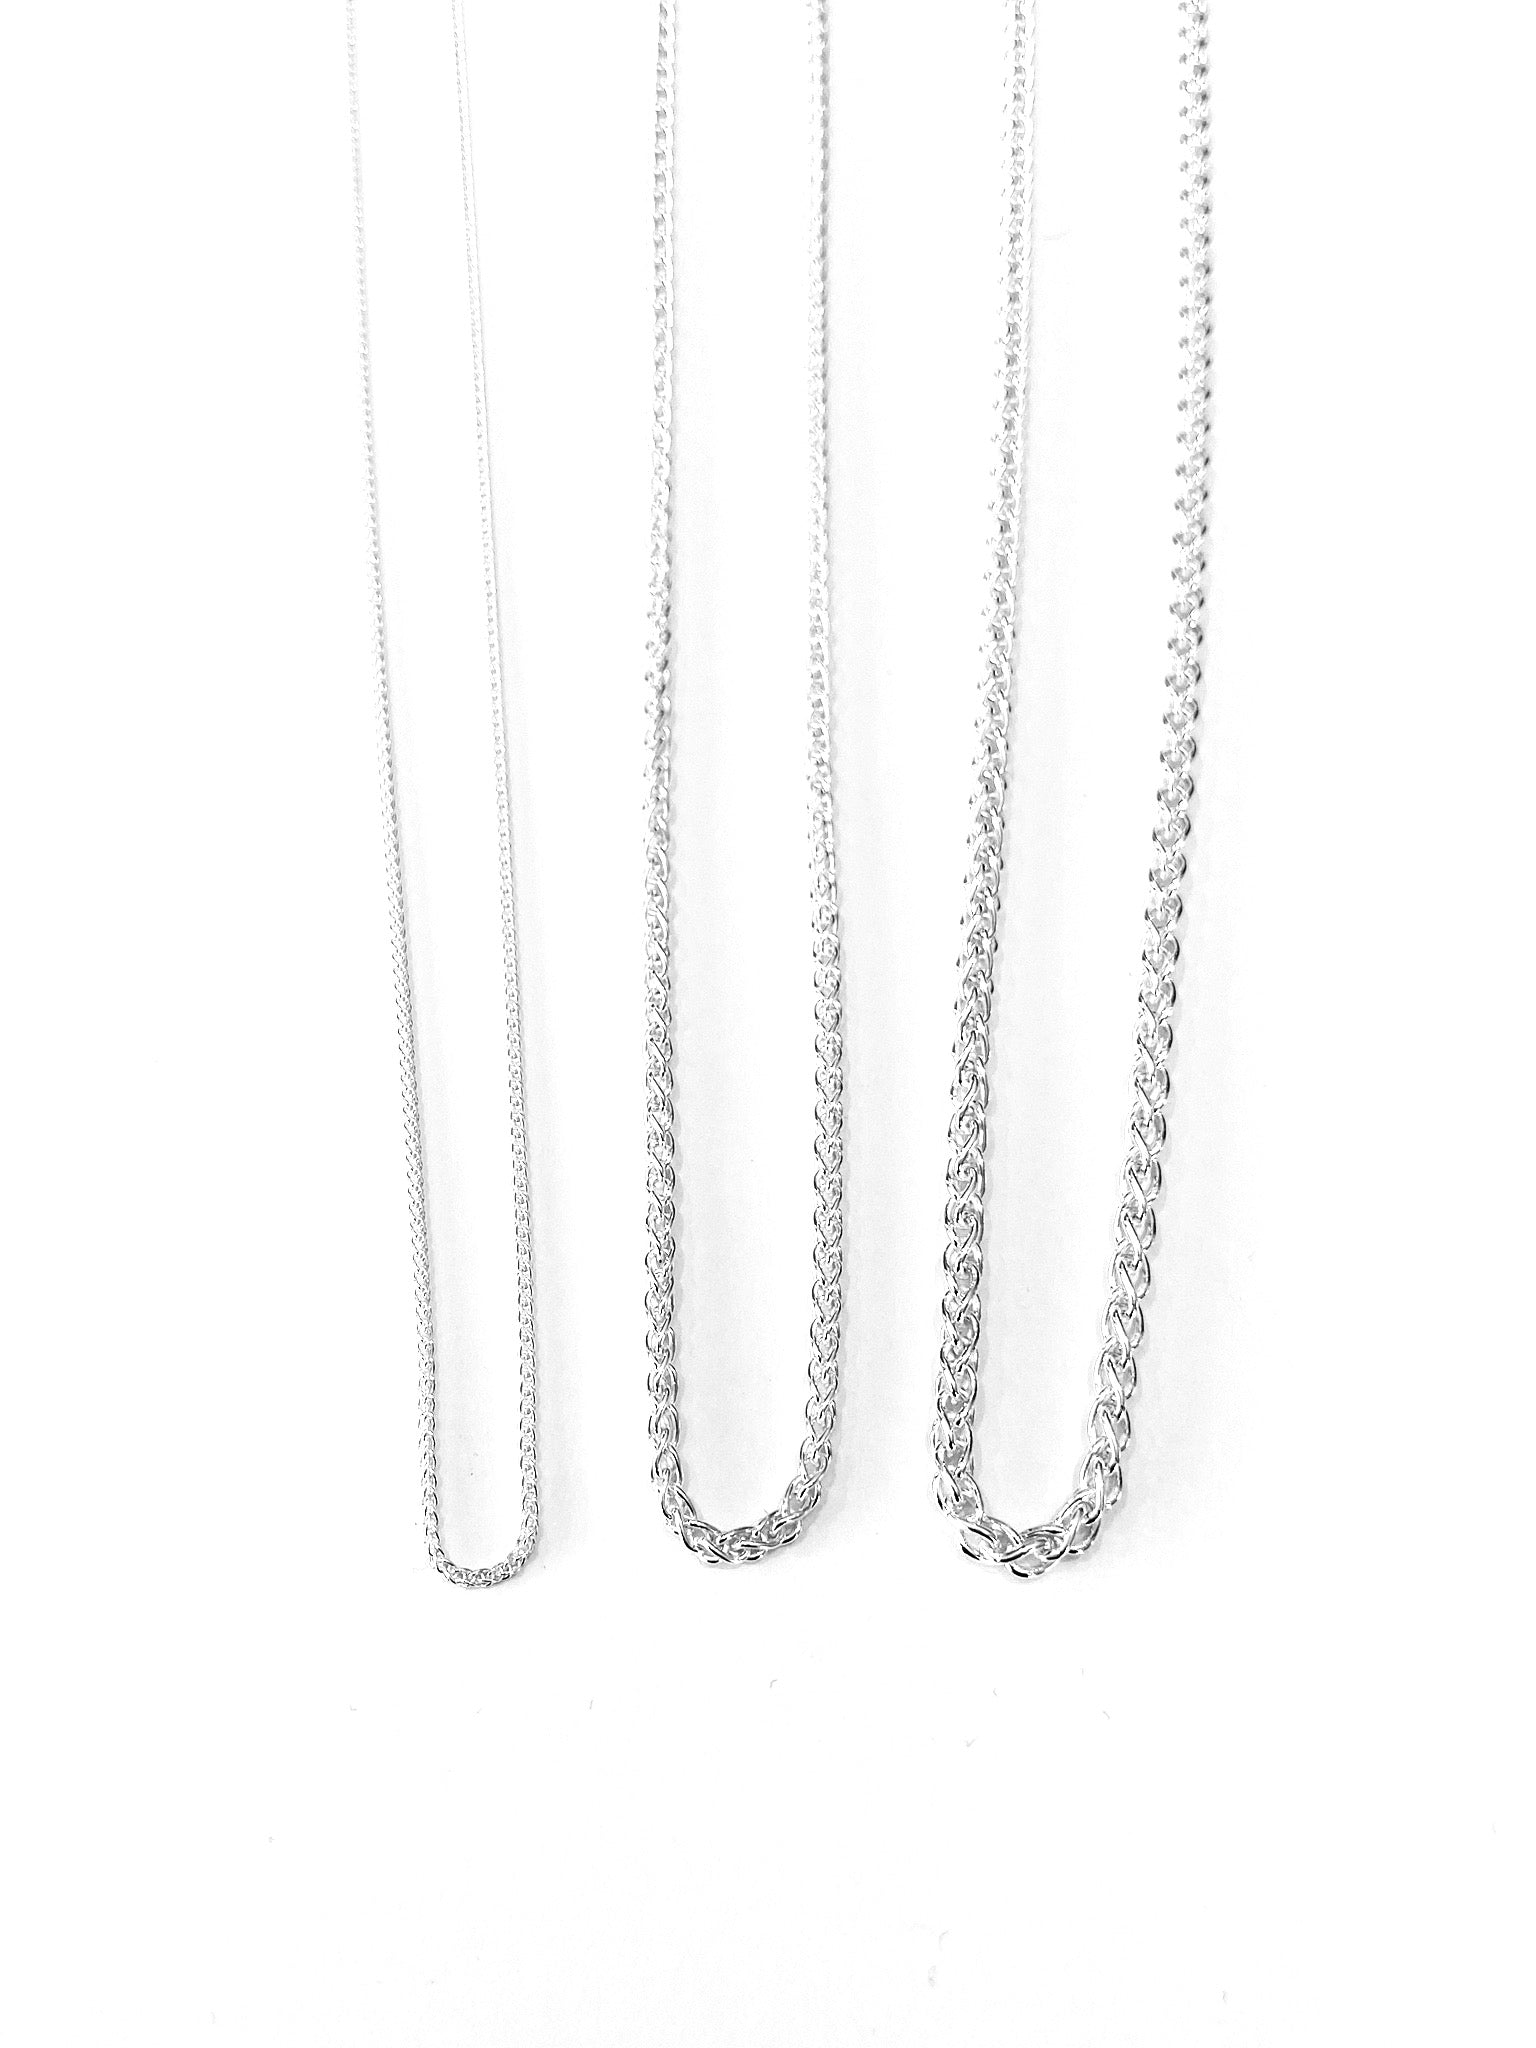 All three sizes of D Street Designs Wheat Chain. High shine jewelry necklace chain in silver color